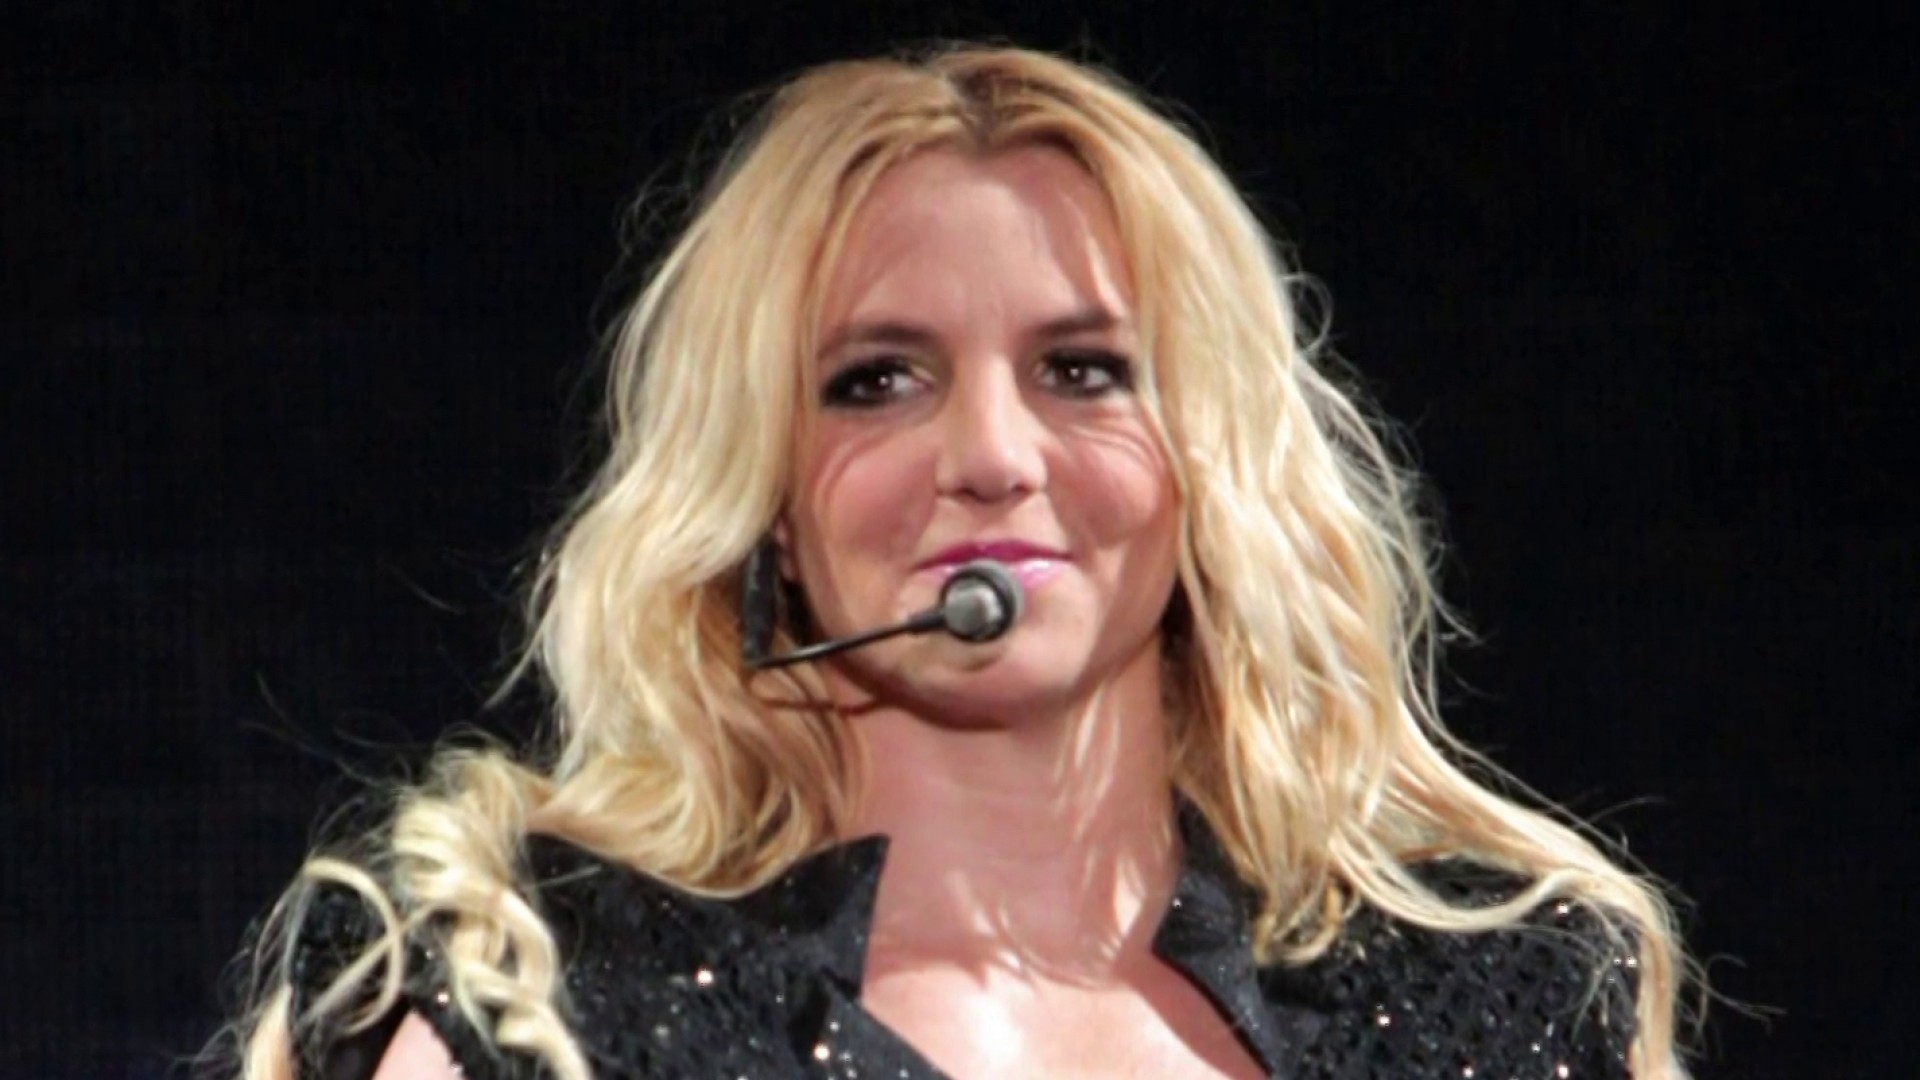 Brittany Spears Now : Britney Spears Conservatorship To Remain As Is ...